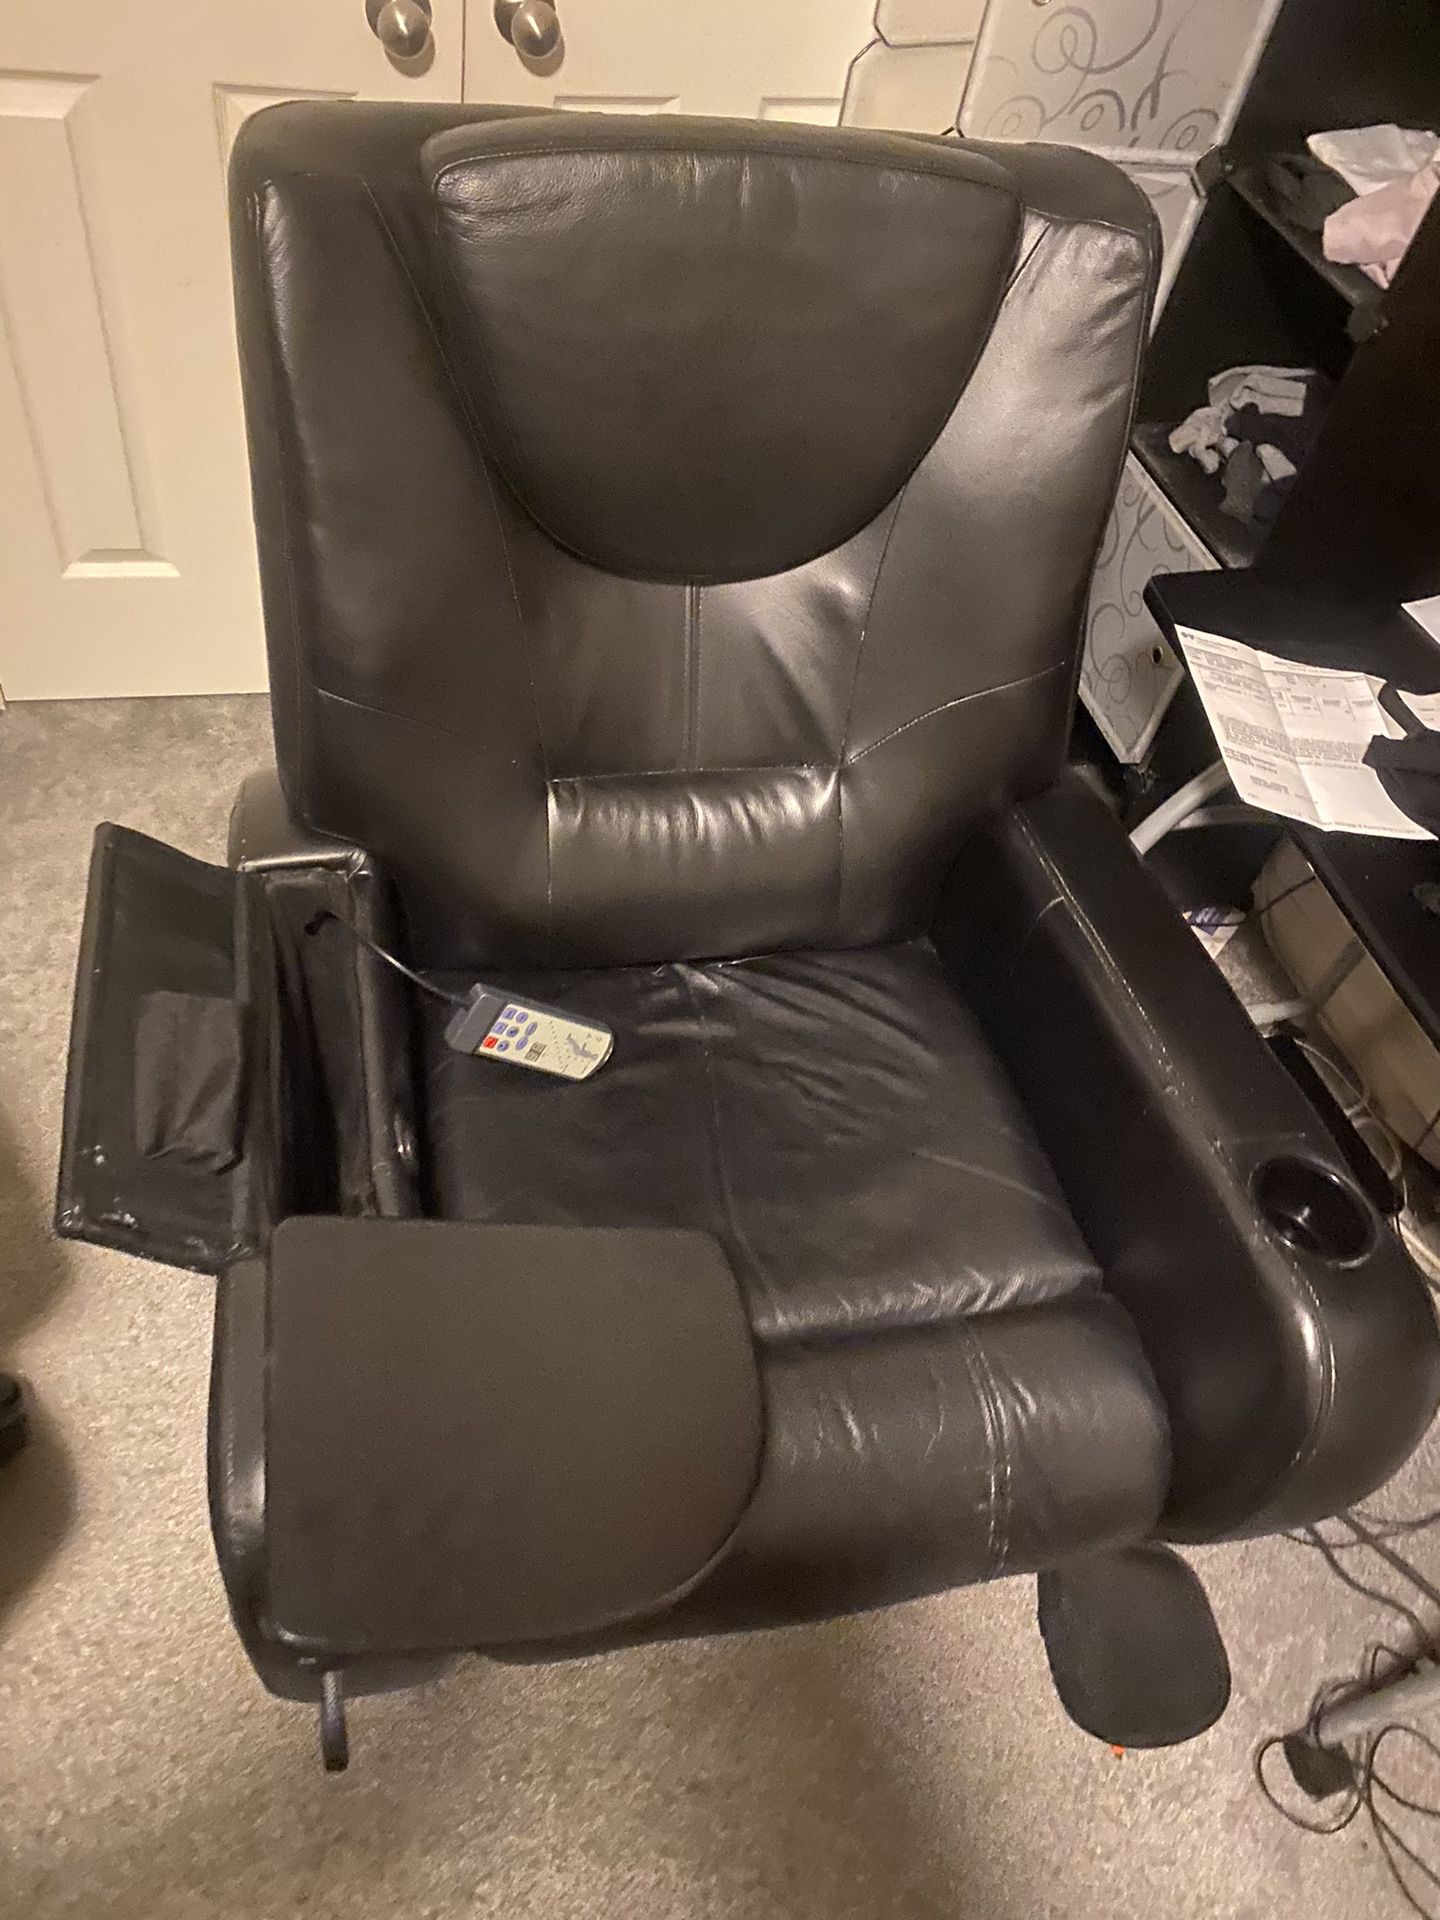 electric recliner massage chair with table and cup holders.